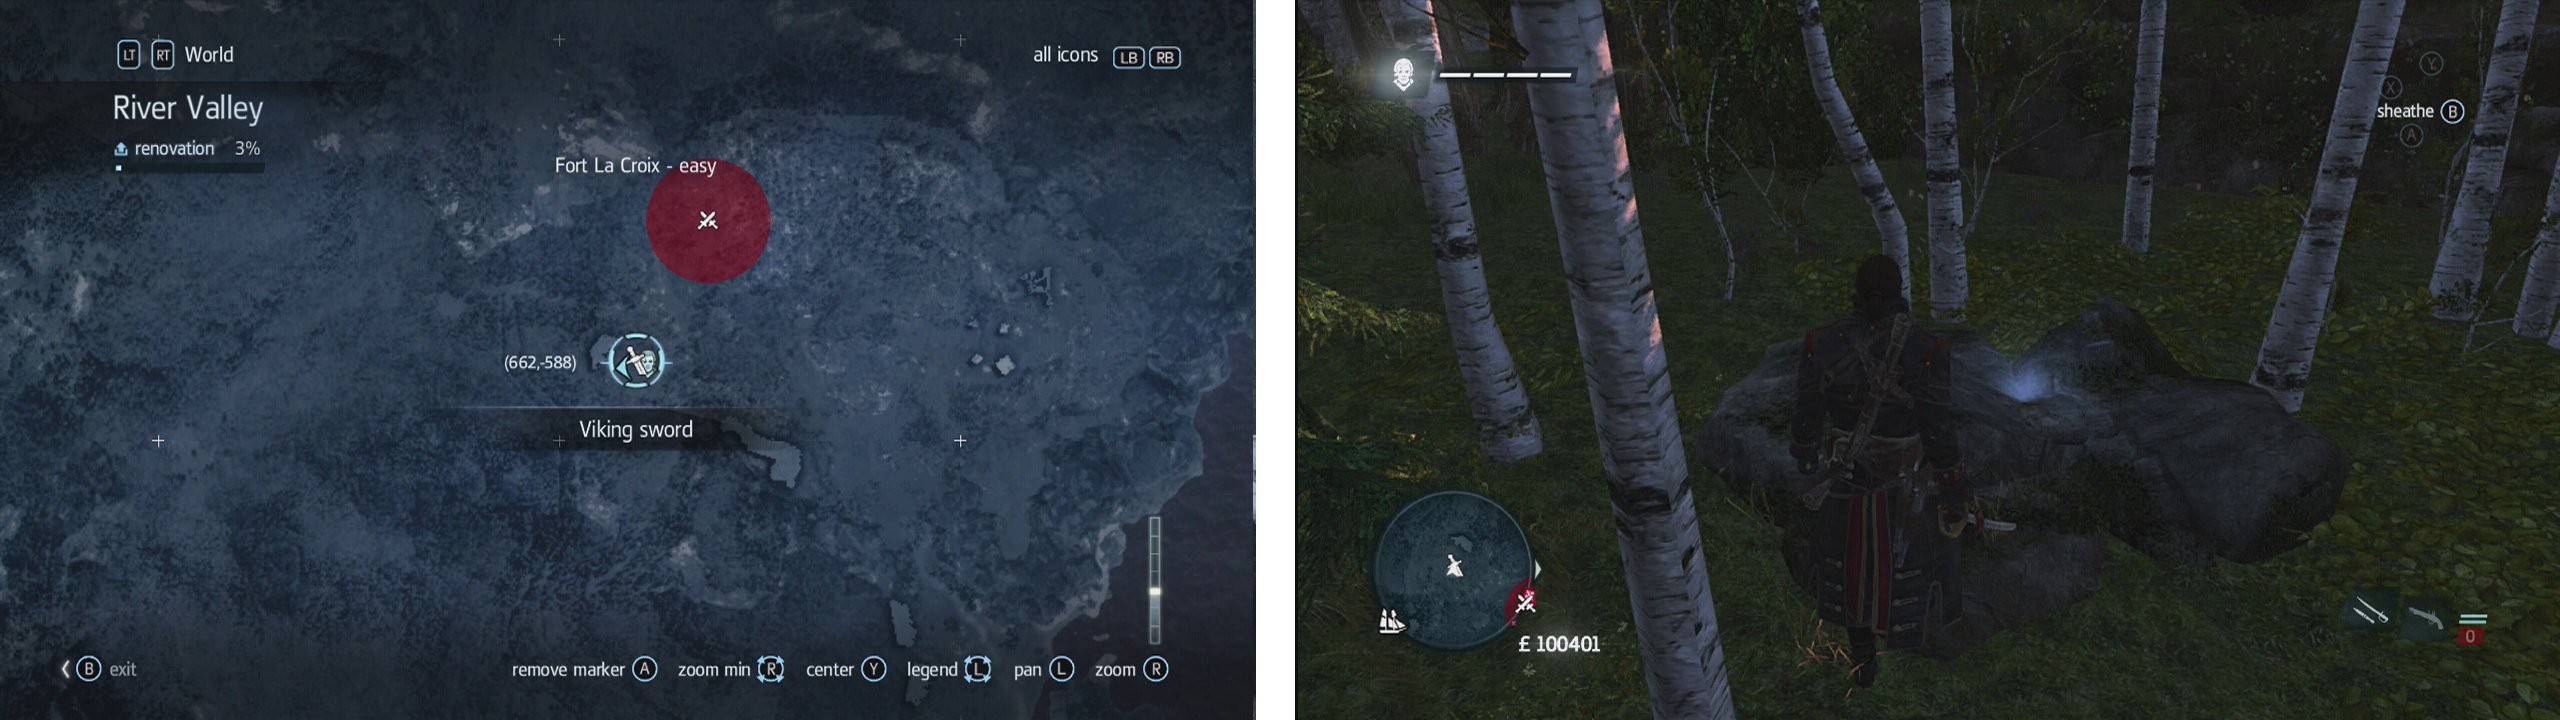 The swod icons on the map (left) indicate a Viking sword fragment. They appear in-game with a blue glow (right).